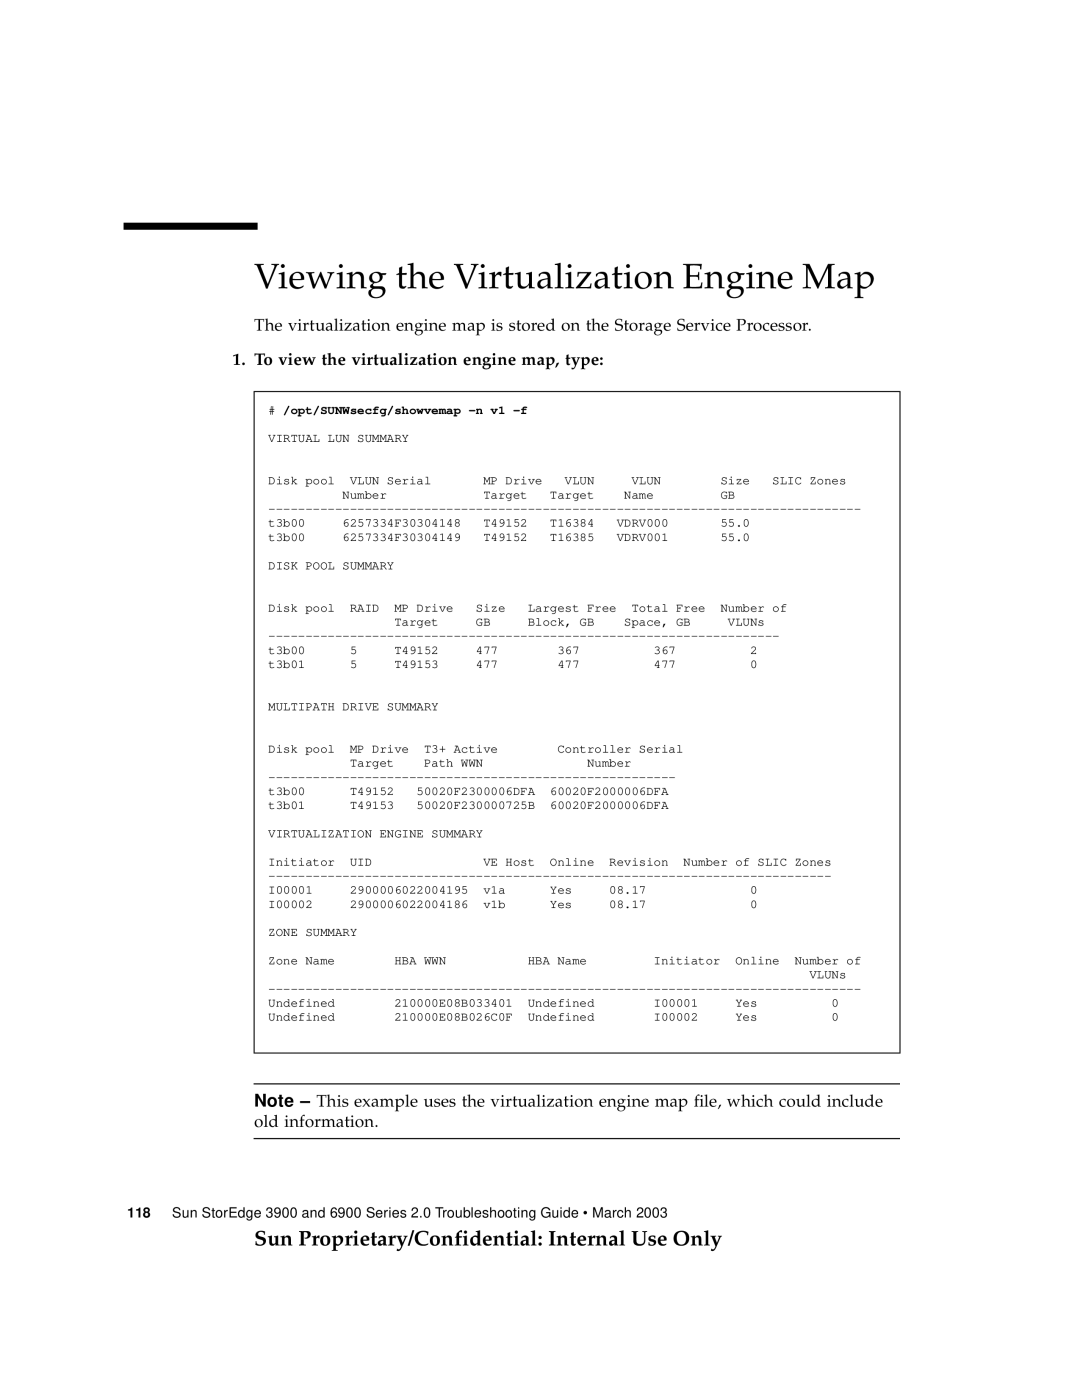 Sun Microsystems 3900, 6900 manual Viewing the Virtualization Engine Map, Sun Proprietary/Confidential Internal Use Only 